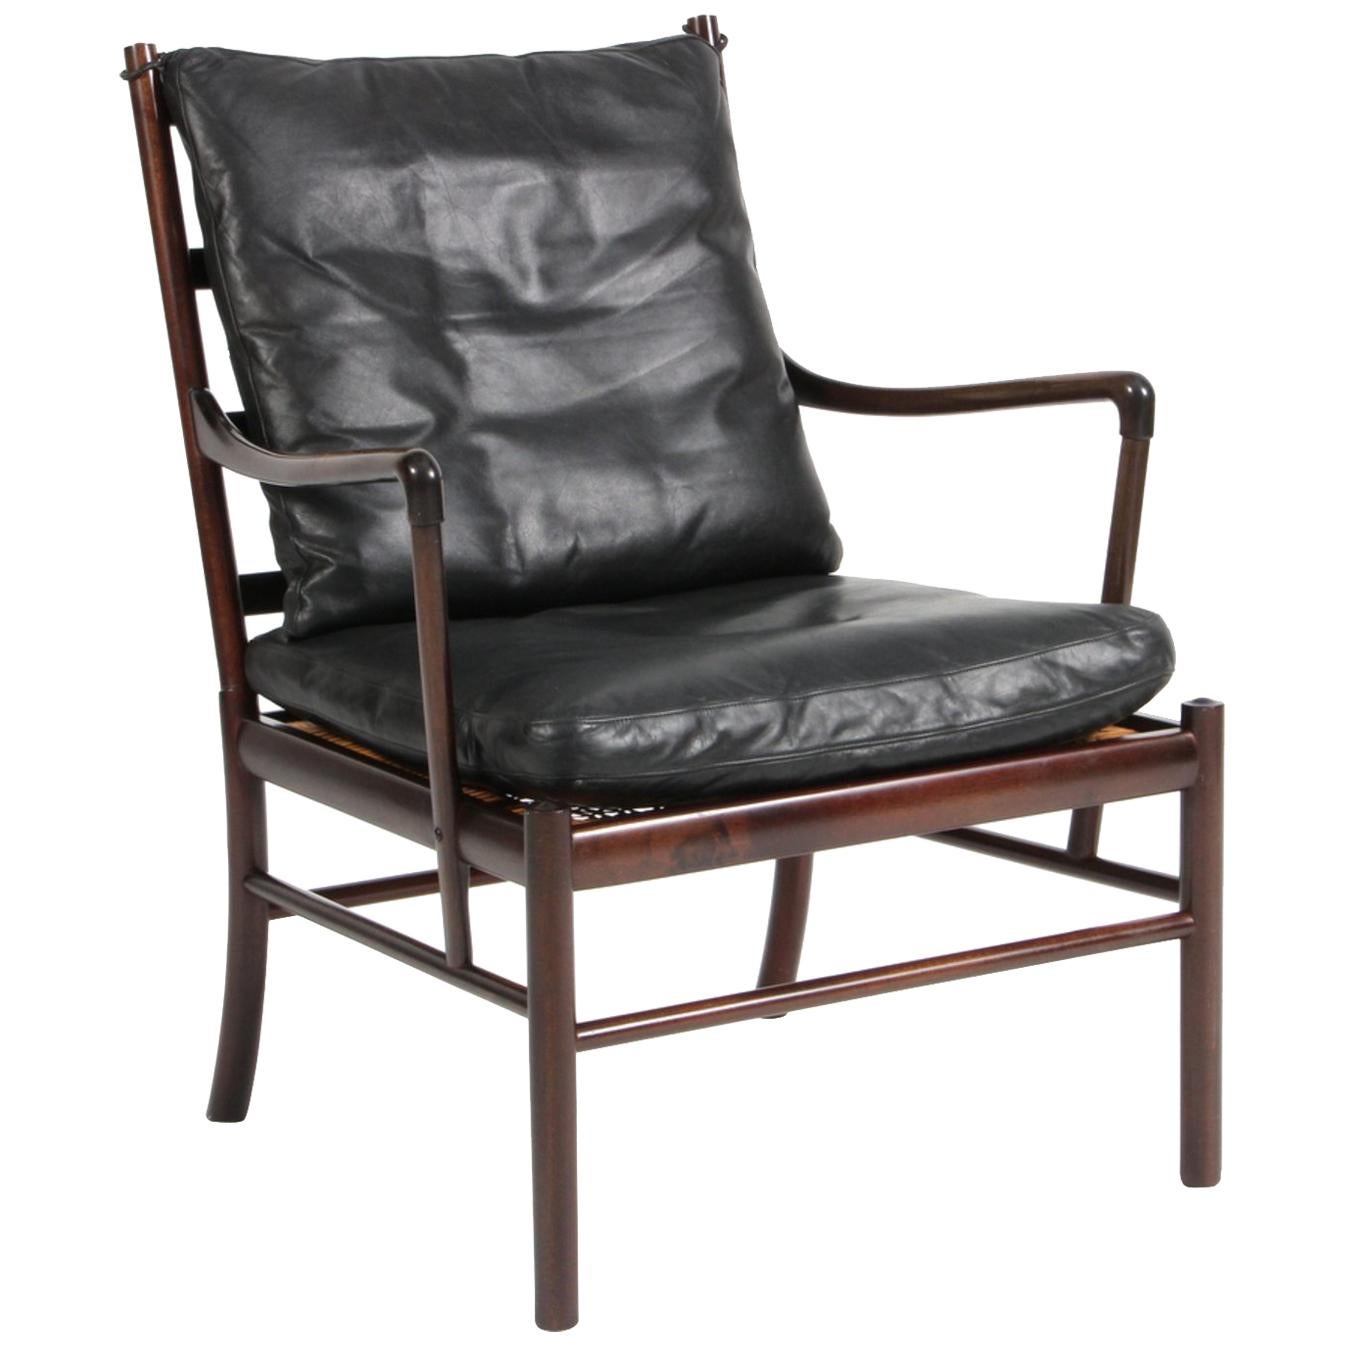 Ole Wanscher Colonial Chair in Mahogany and Original Leather, PJ 149